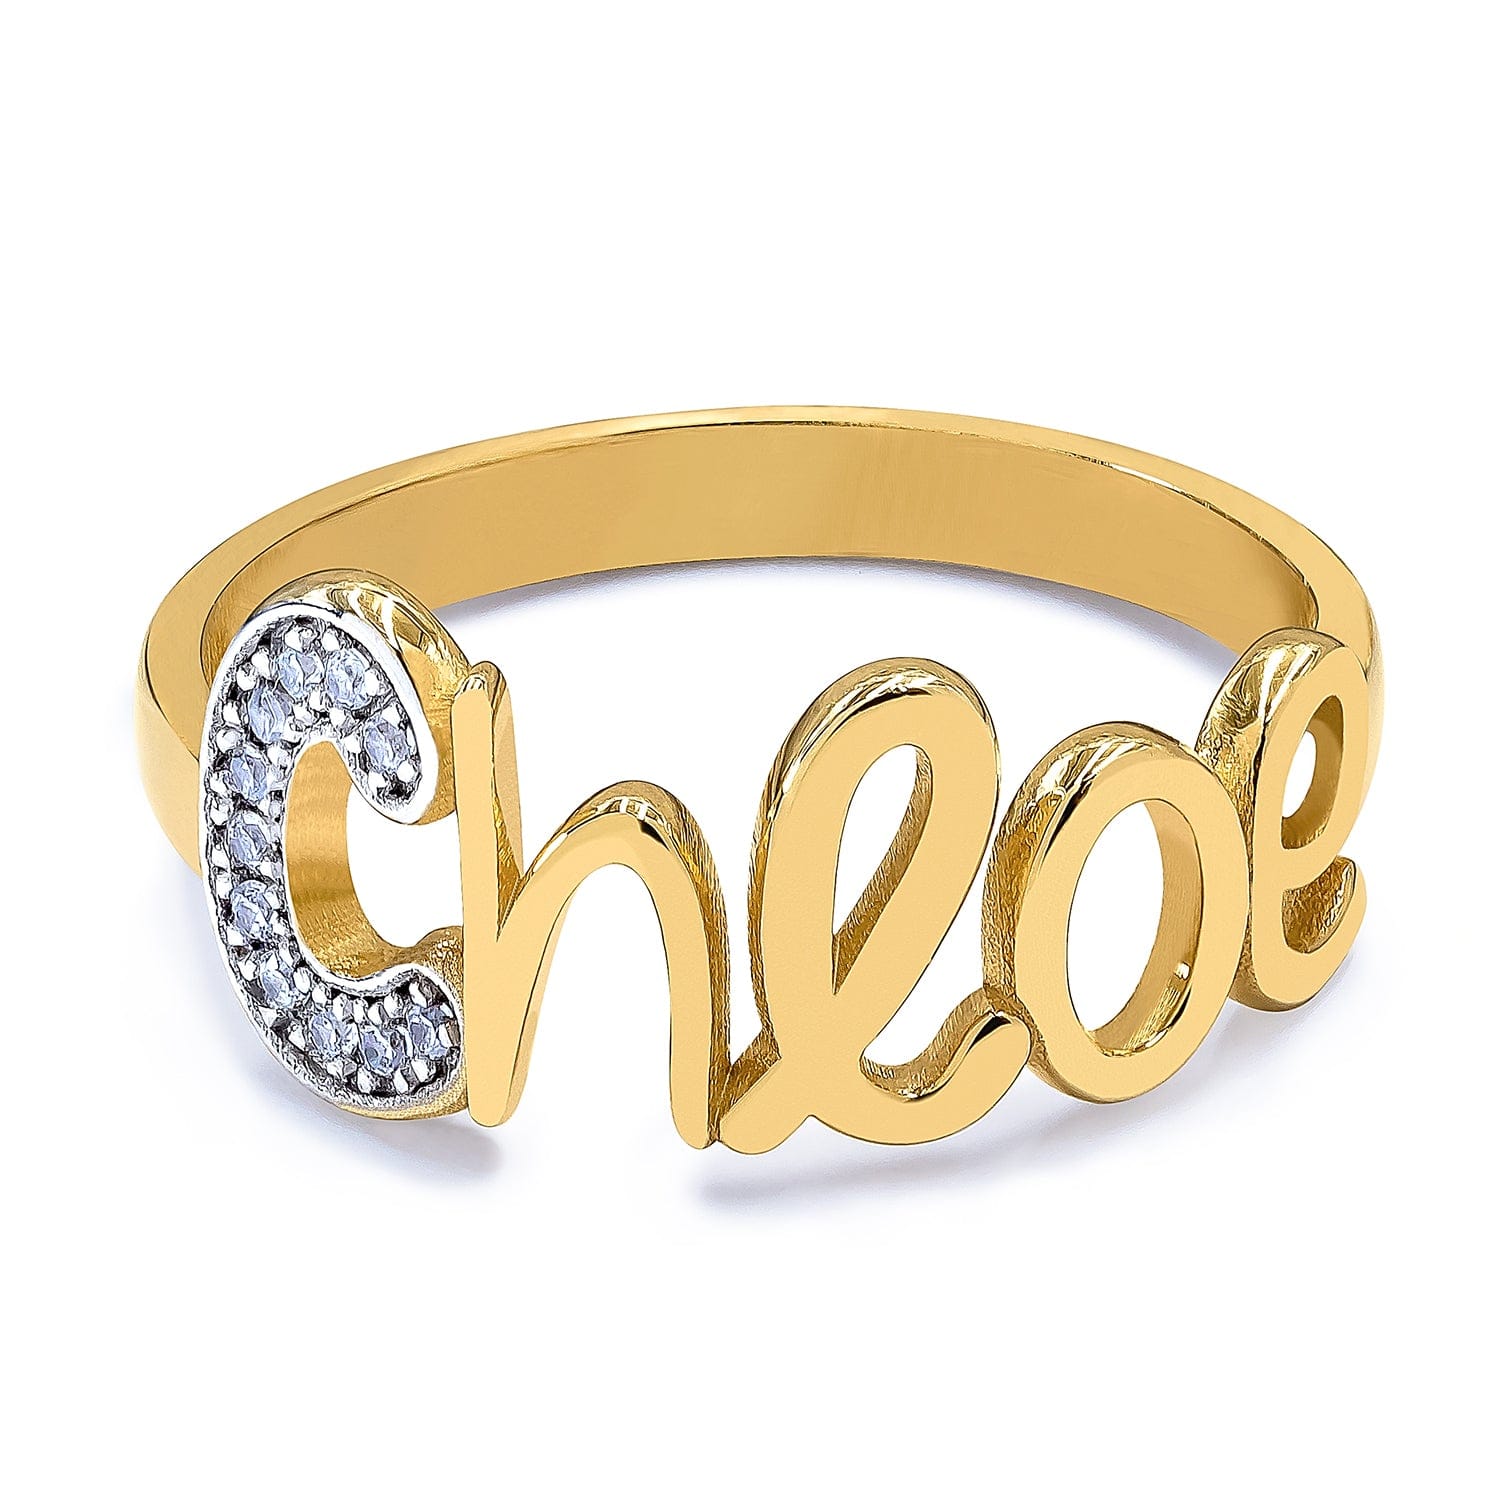 14K Gold over Sterling Silver Personalized Name Ring w/ Cubic Zirconia